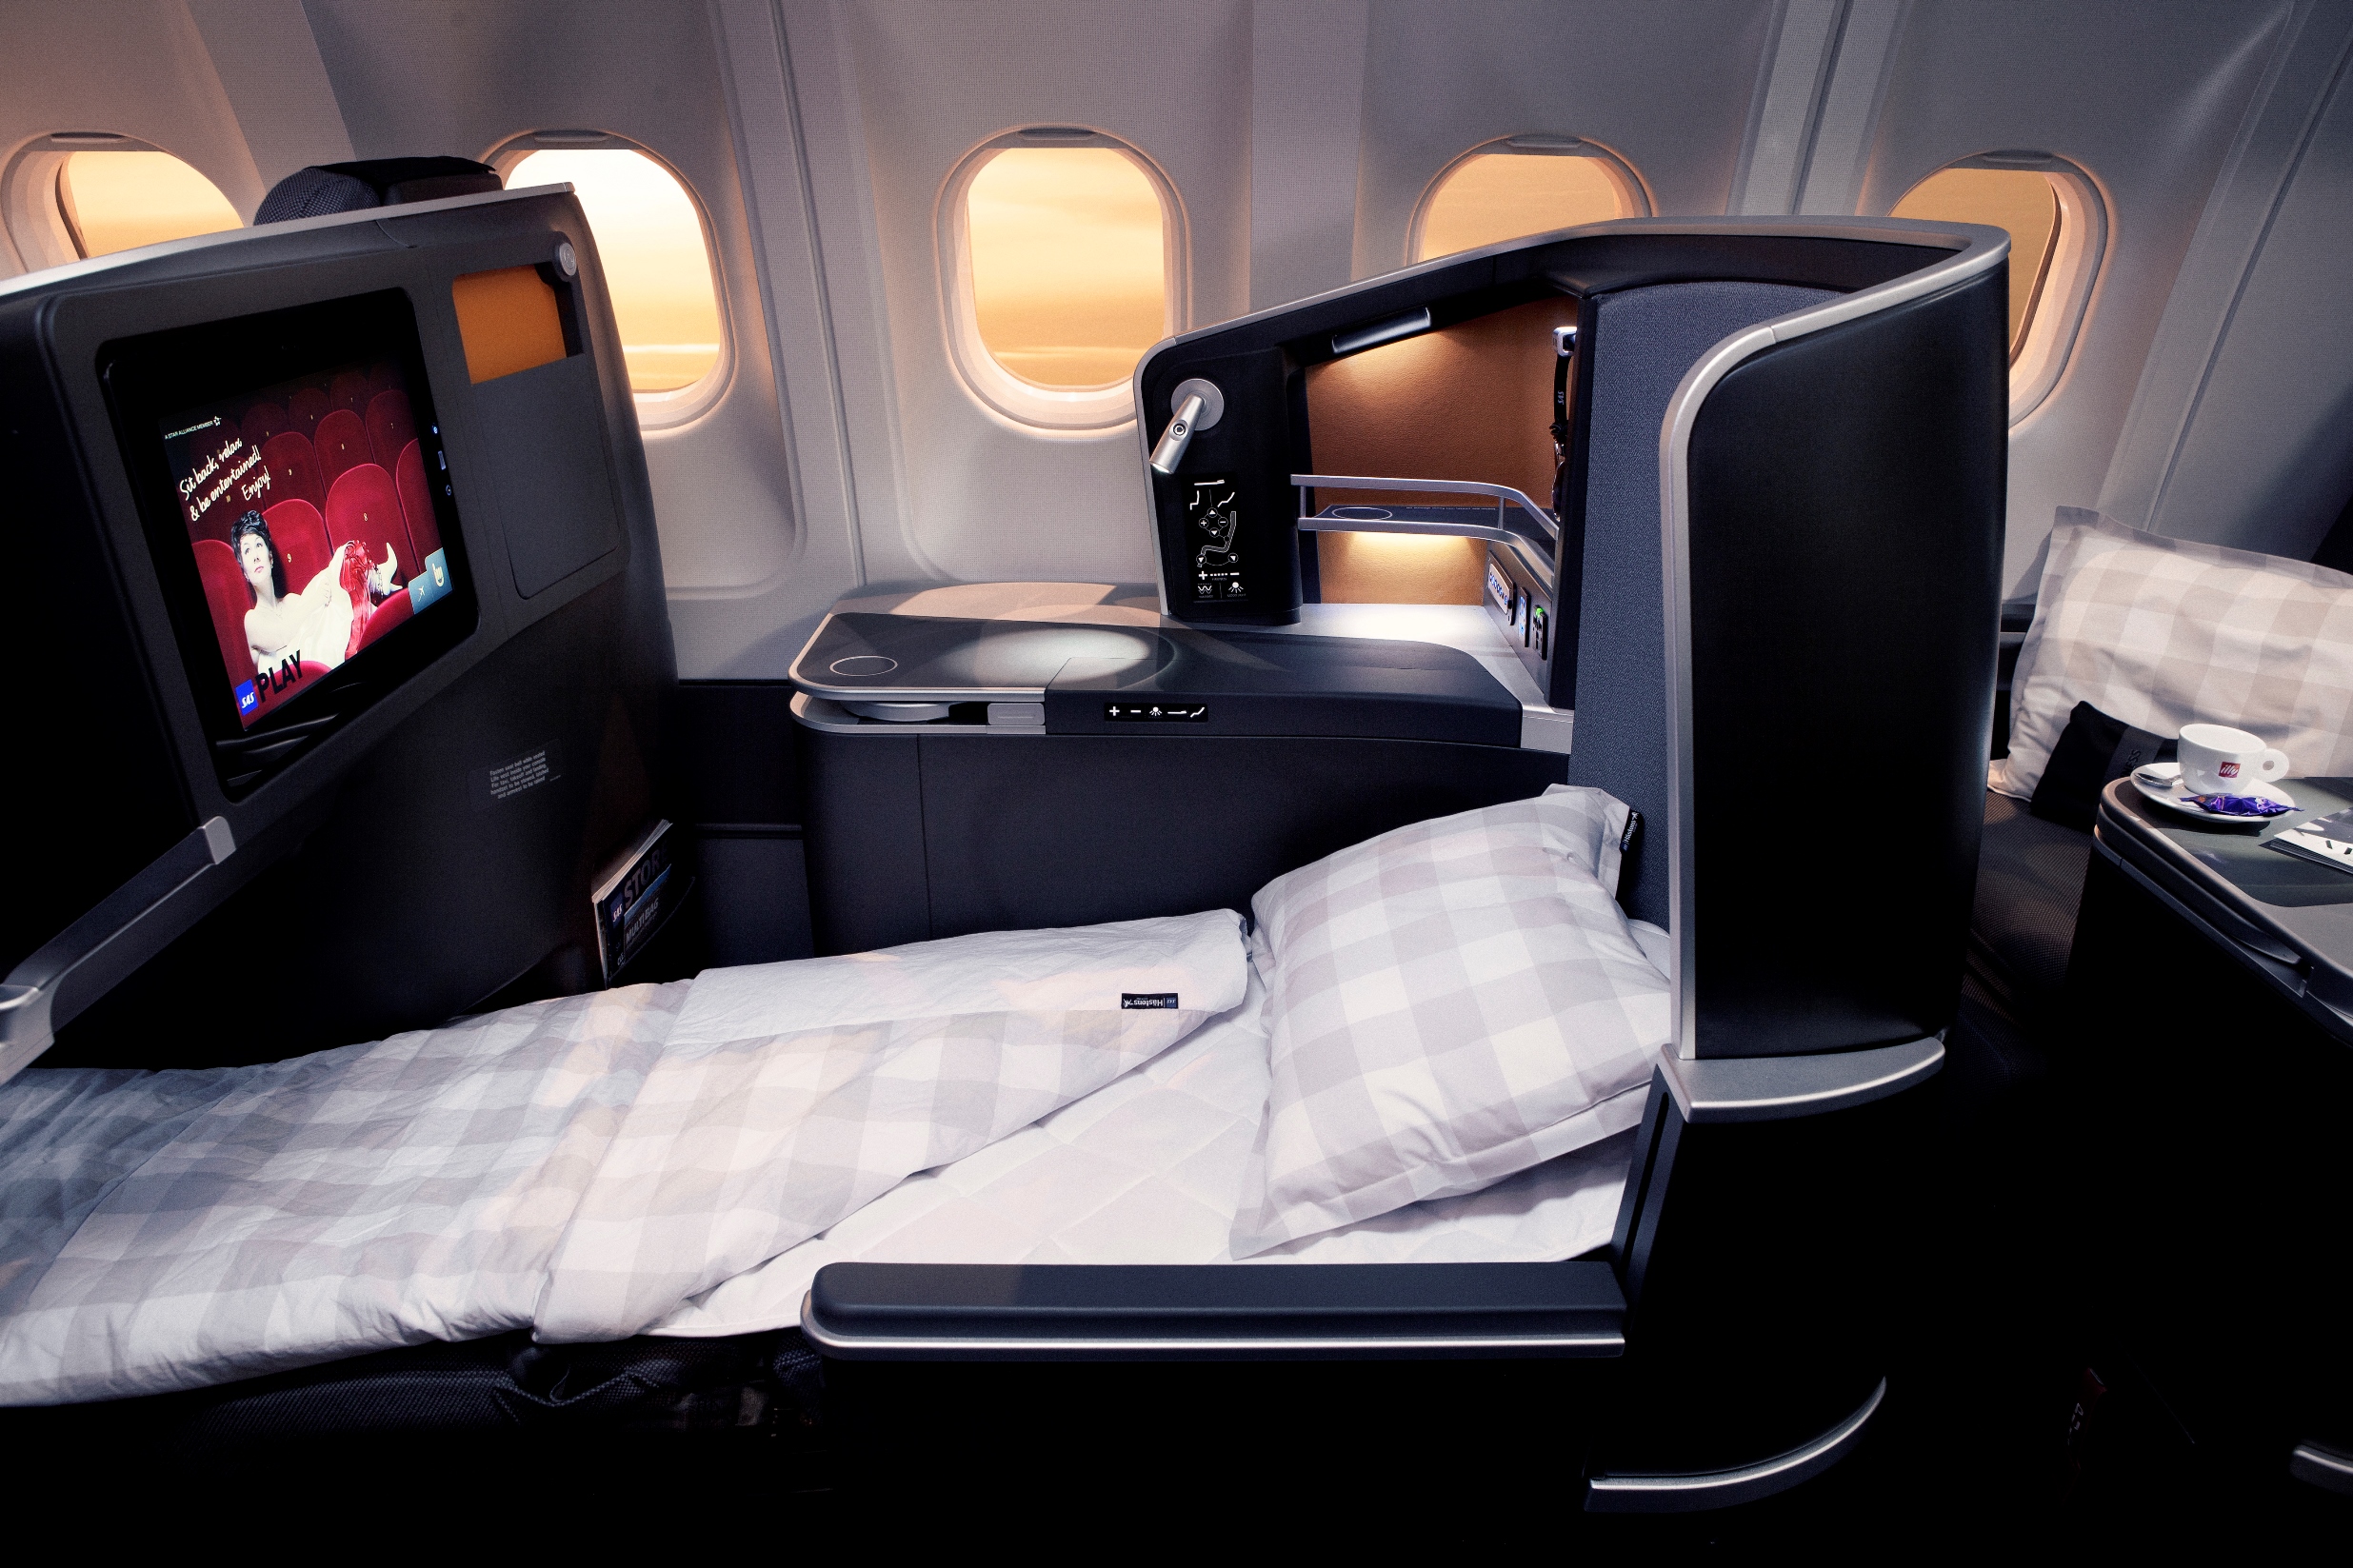 SAS_Airlines_Business Class_Feb 2015_002